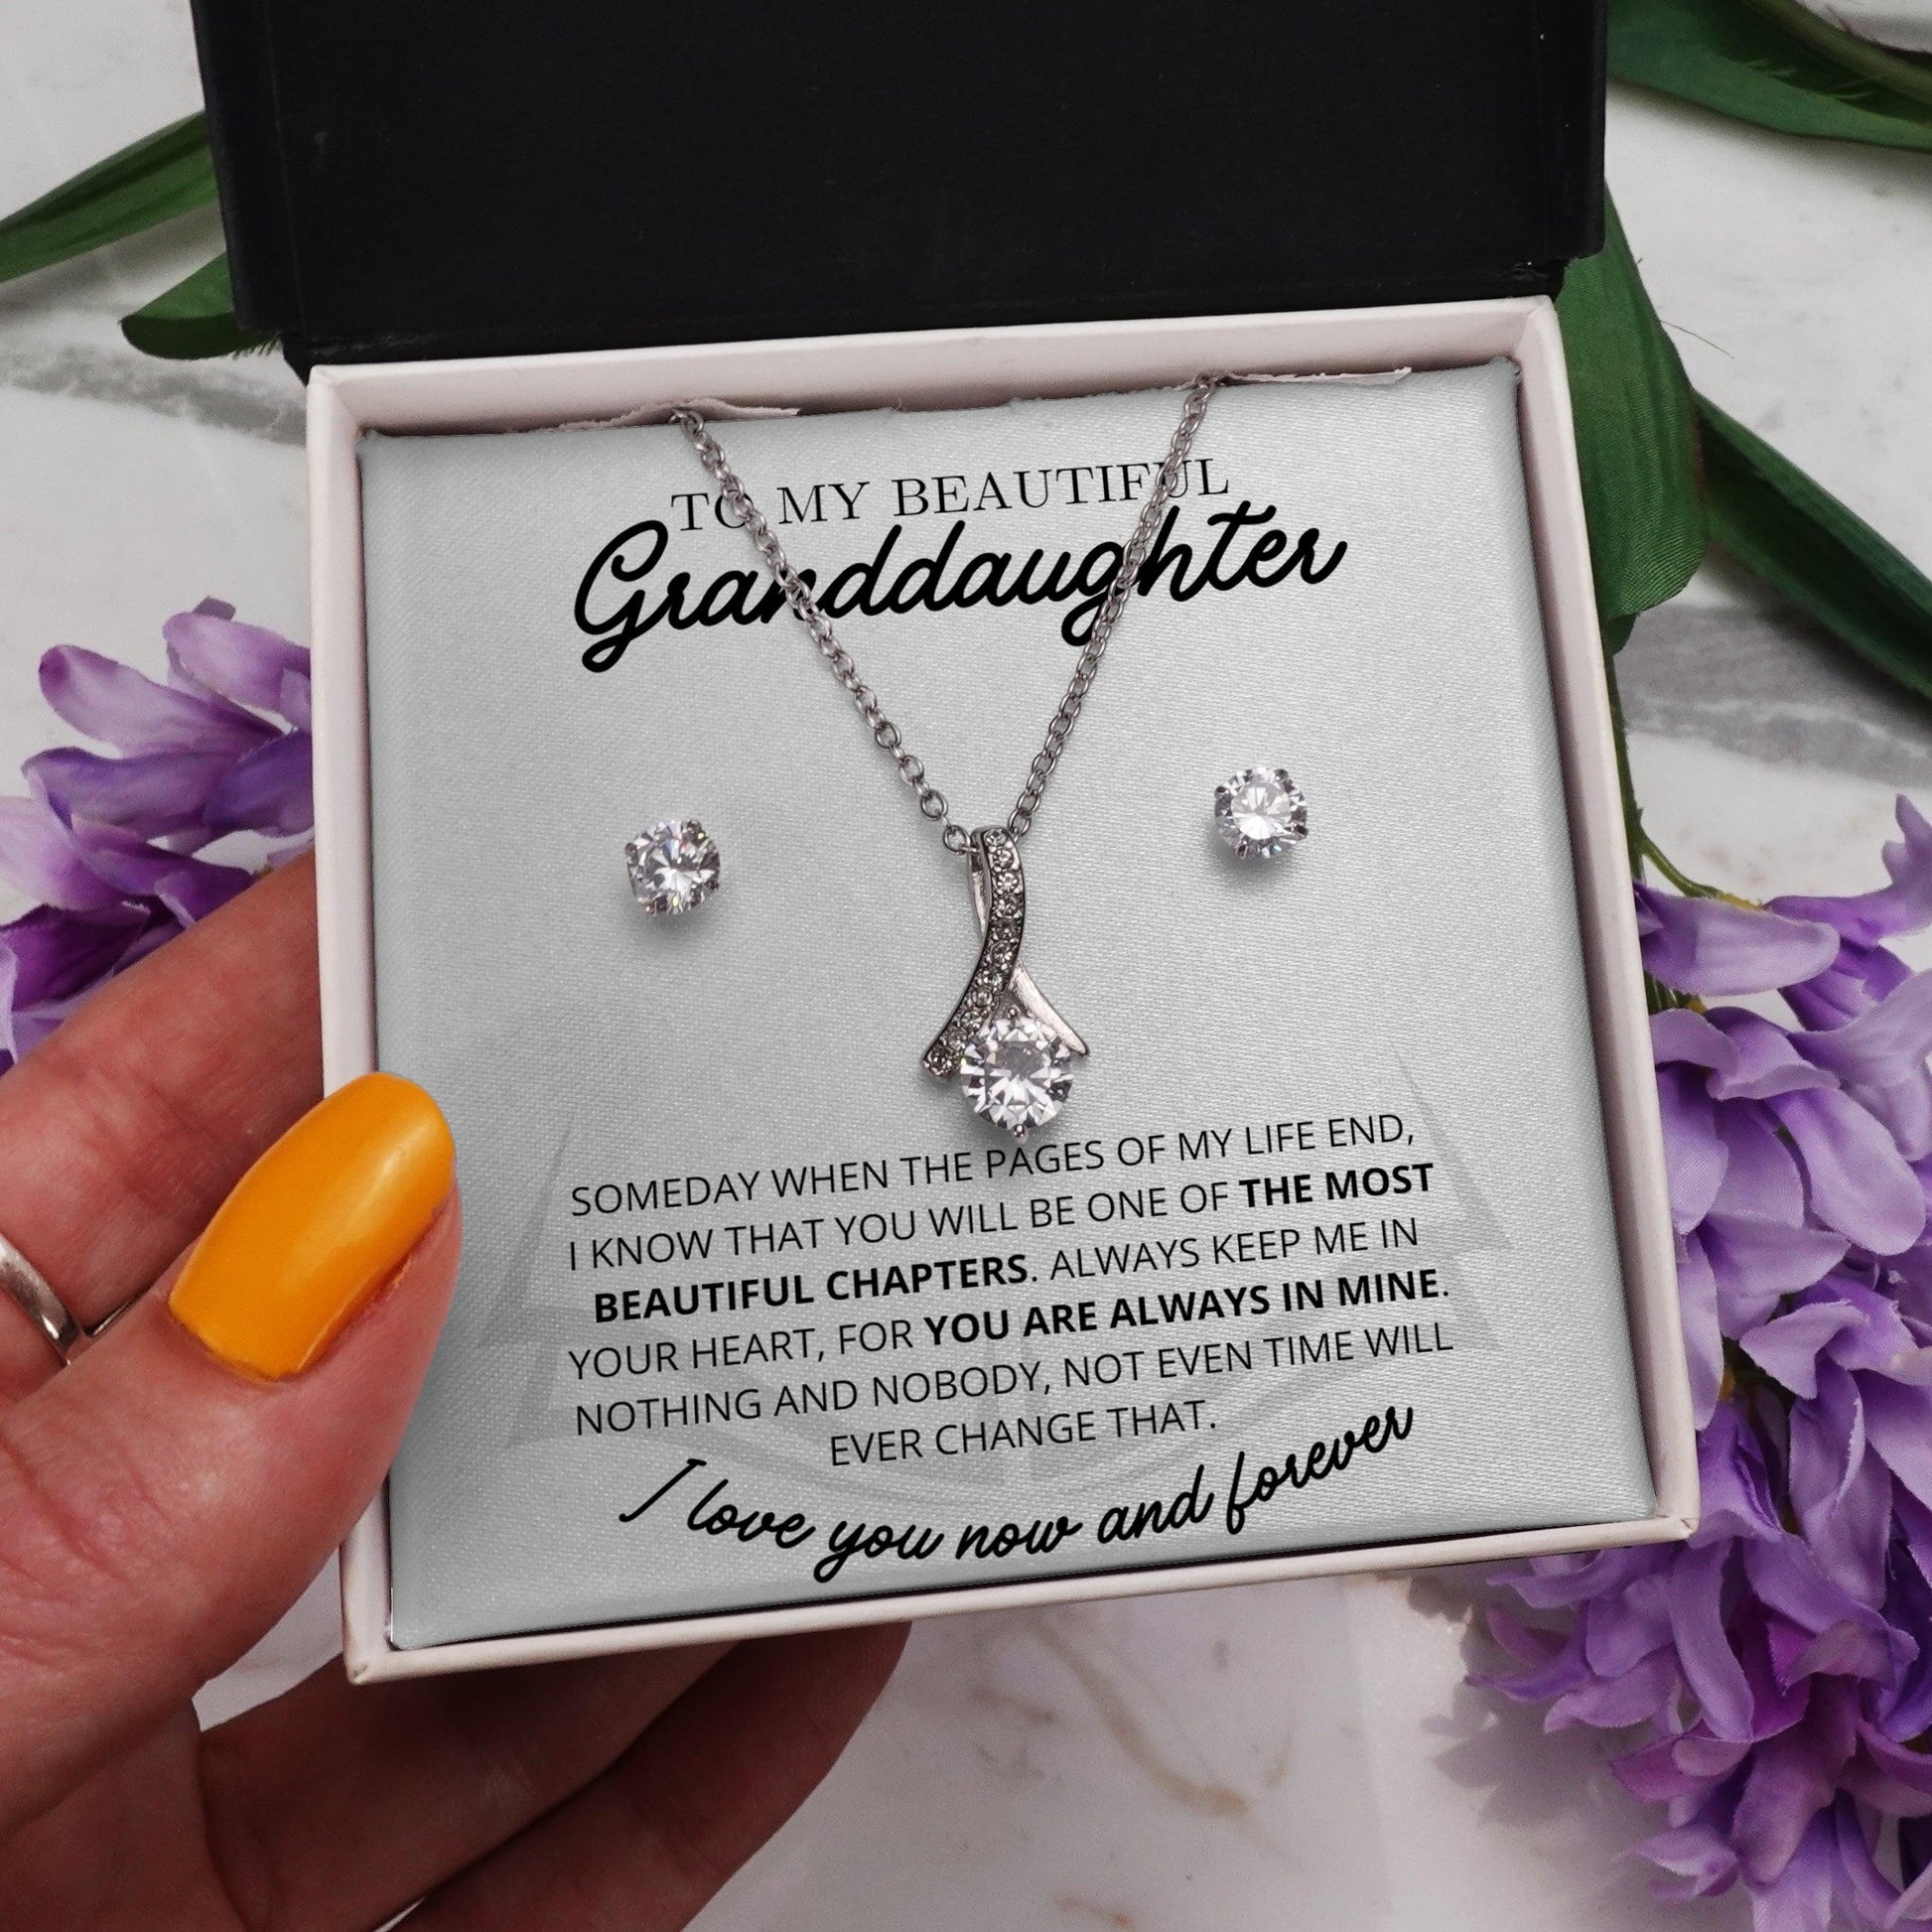 Jewelry gifts Granddaughter - Beautiful Chapters - Alluring Gift Set - Belesmé - Memorable Jewelry Gifts 